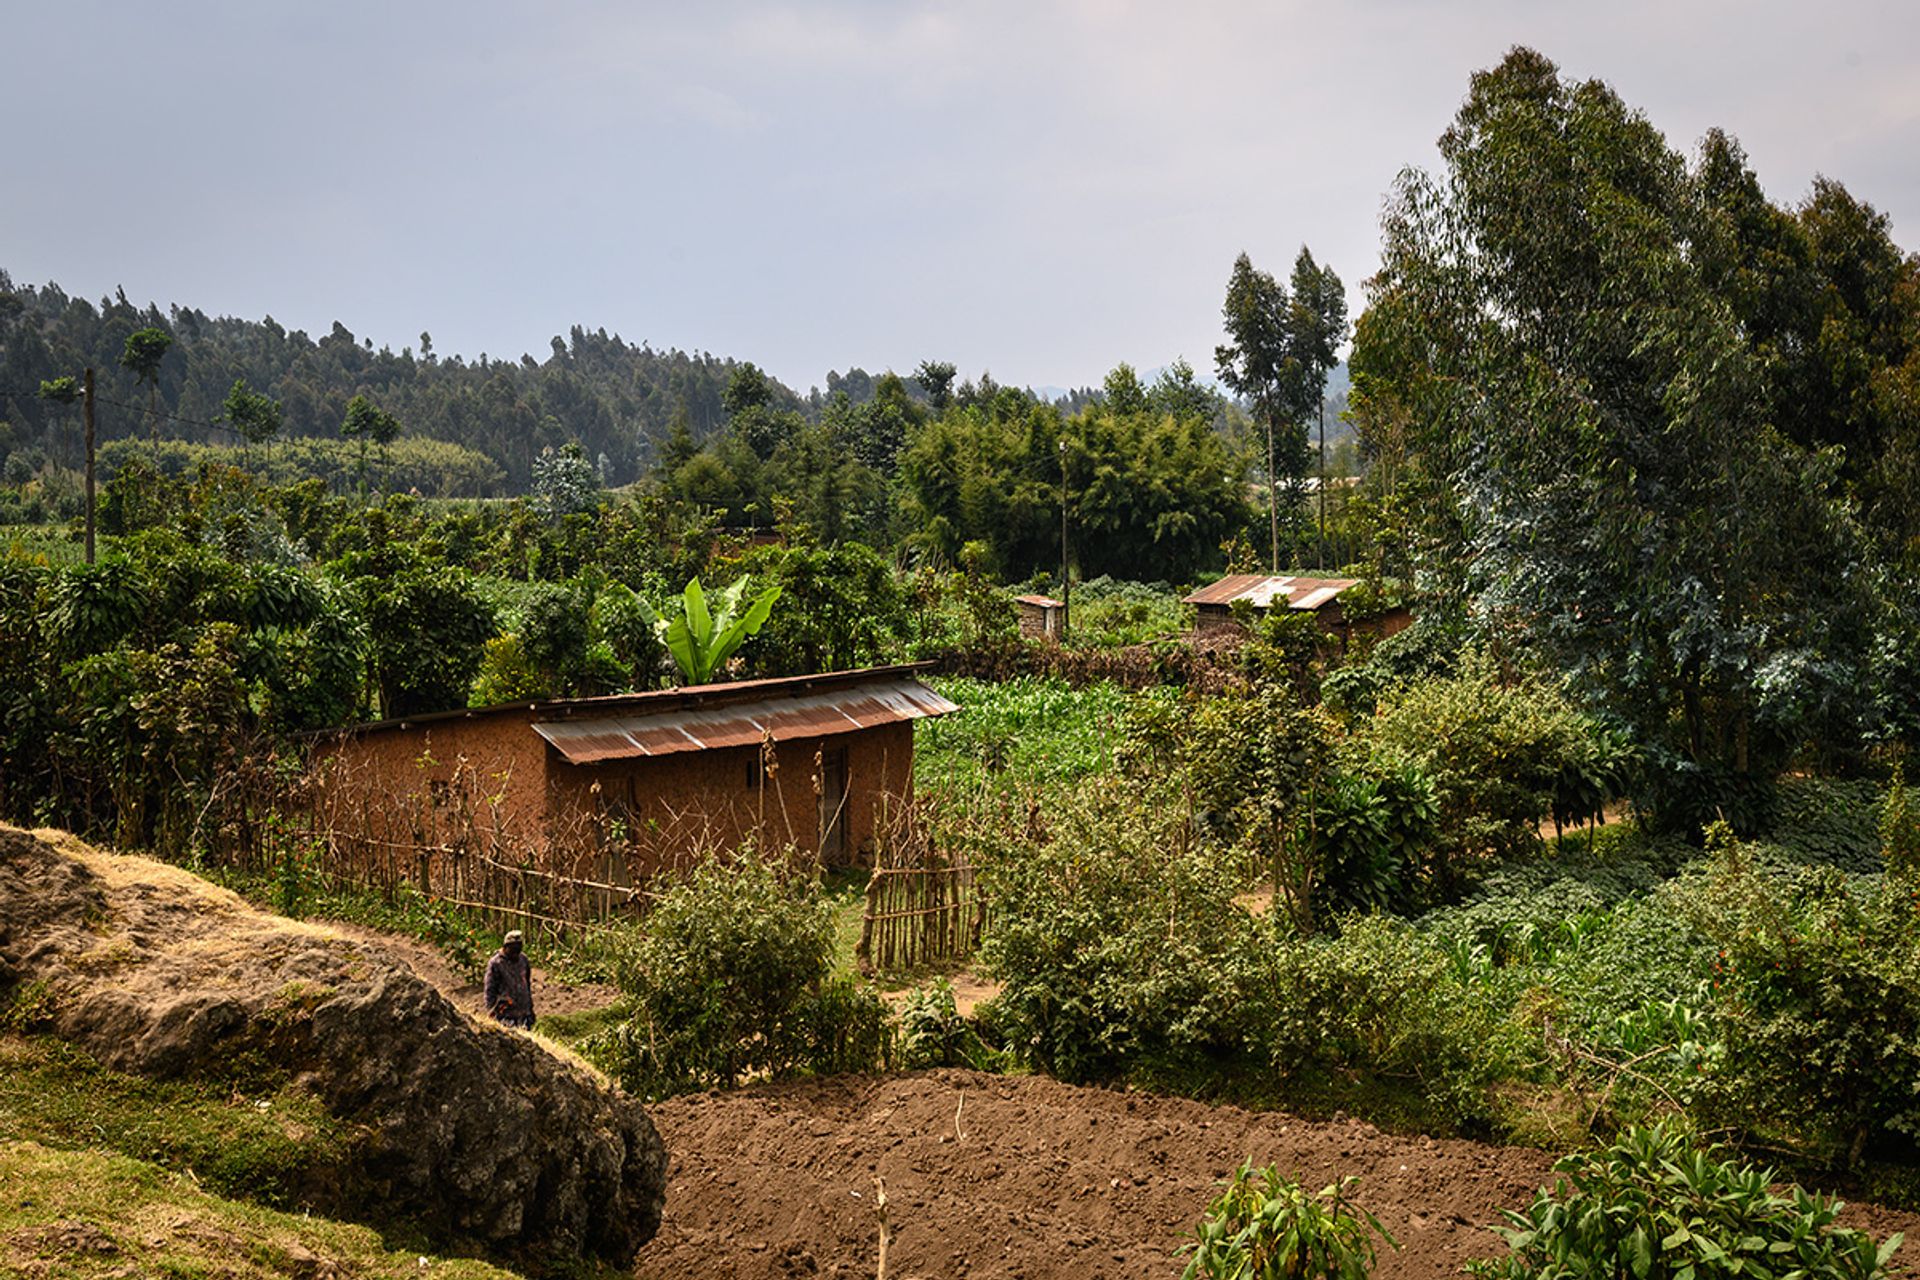 One of the farms at the foothill that line the path to the volcanic range. This household is among 3,000 families that will be relocated to make way for a buffer zone.